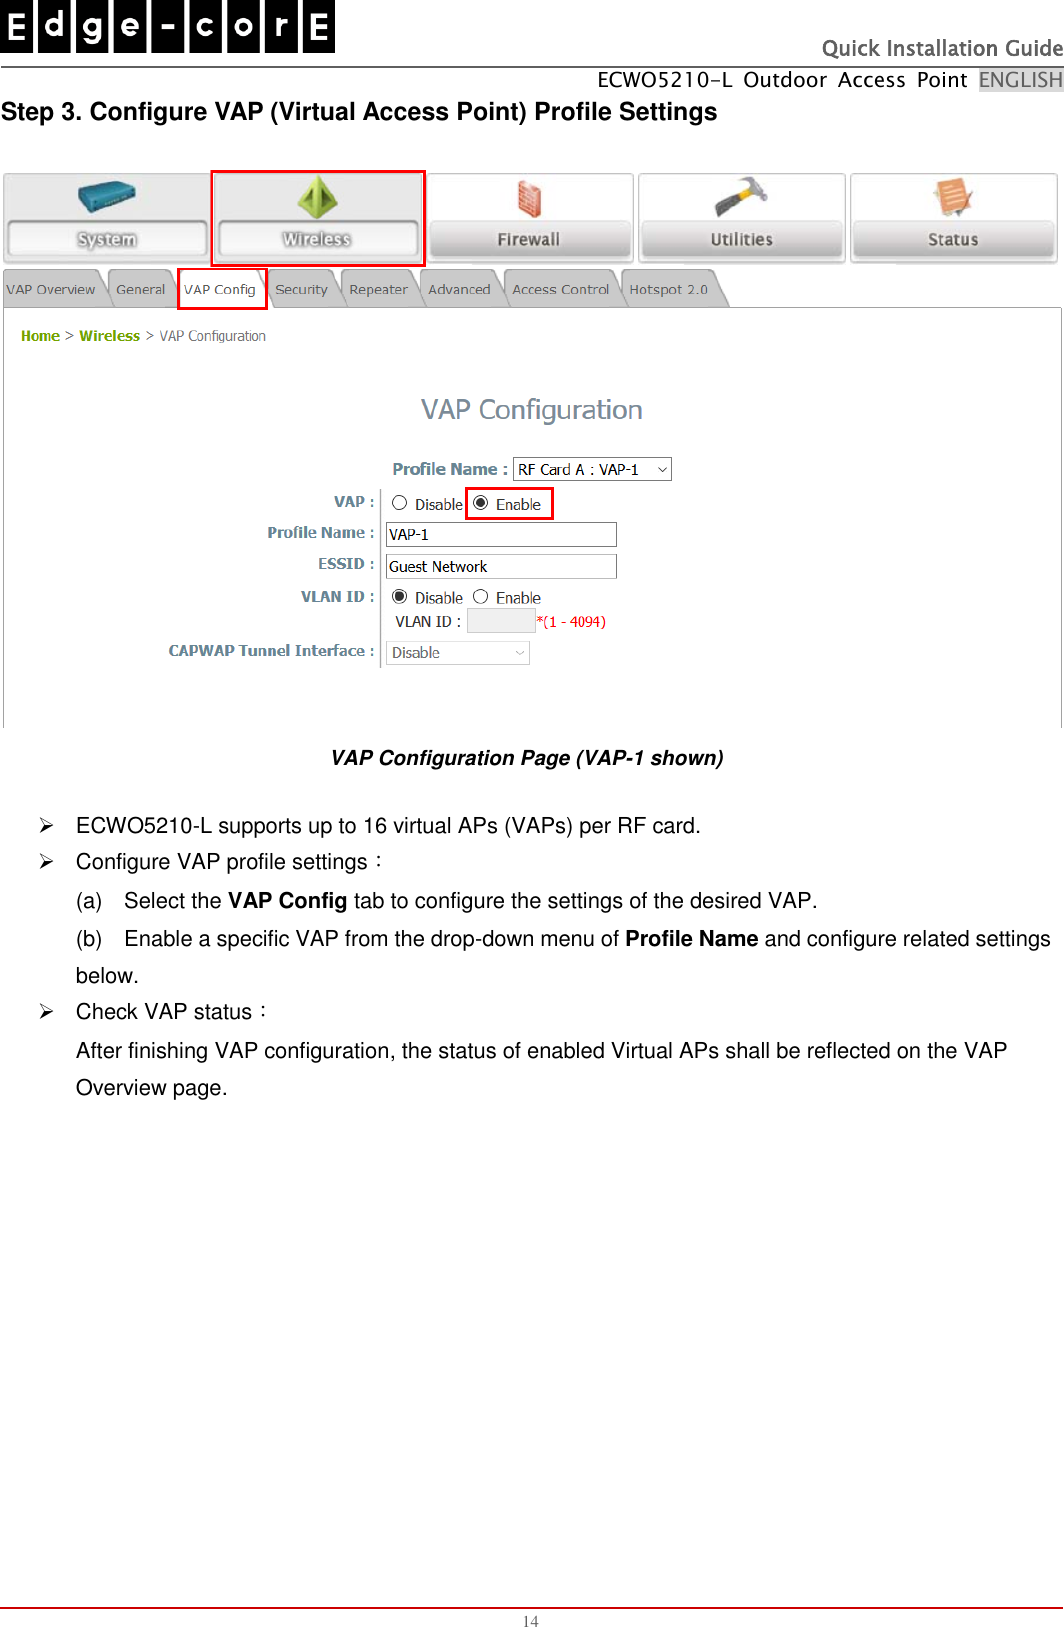   Quick Installation Guide ECWO5210-L  Outdoor  Access  Point  ENGLISH  14 Step 3. Configure VAP (Virtual Access Point) Profile Settings  VAP Configuration Page (VAP-1 shown)   ECWO5210-L supports up to 16 virtual APs (VAPs) per RF card.   Configure VAP profile settings： (a)    Select the VAP Config tab to configure the settings of the desired VAP.   (b)    Enable a specific VAP from the drop-down menu of Profile Name and configure related settings below.   Check VAP status： After finishing VAP configuration, the status of enabled Virtual APs shall be reflected on the VAP Overview page.   